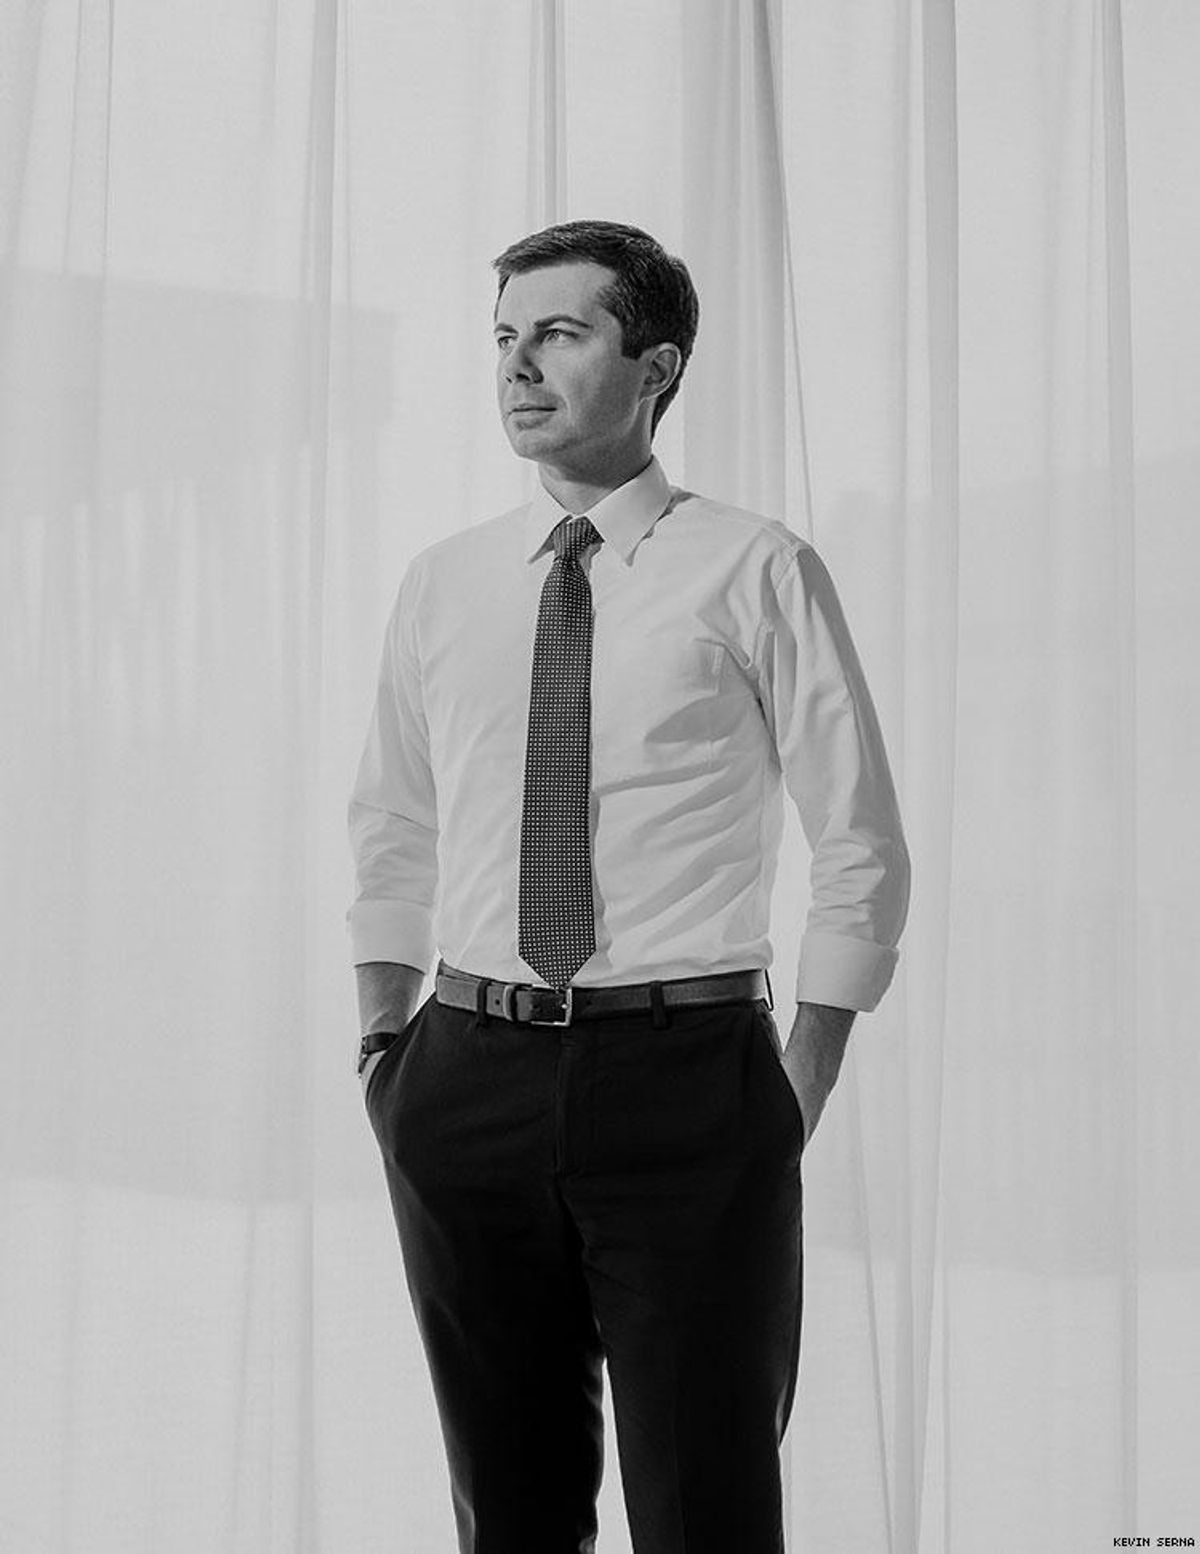 Is Pete Buttigieg Really What We Need for President?